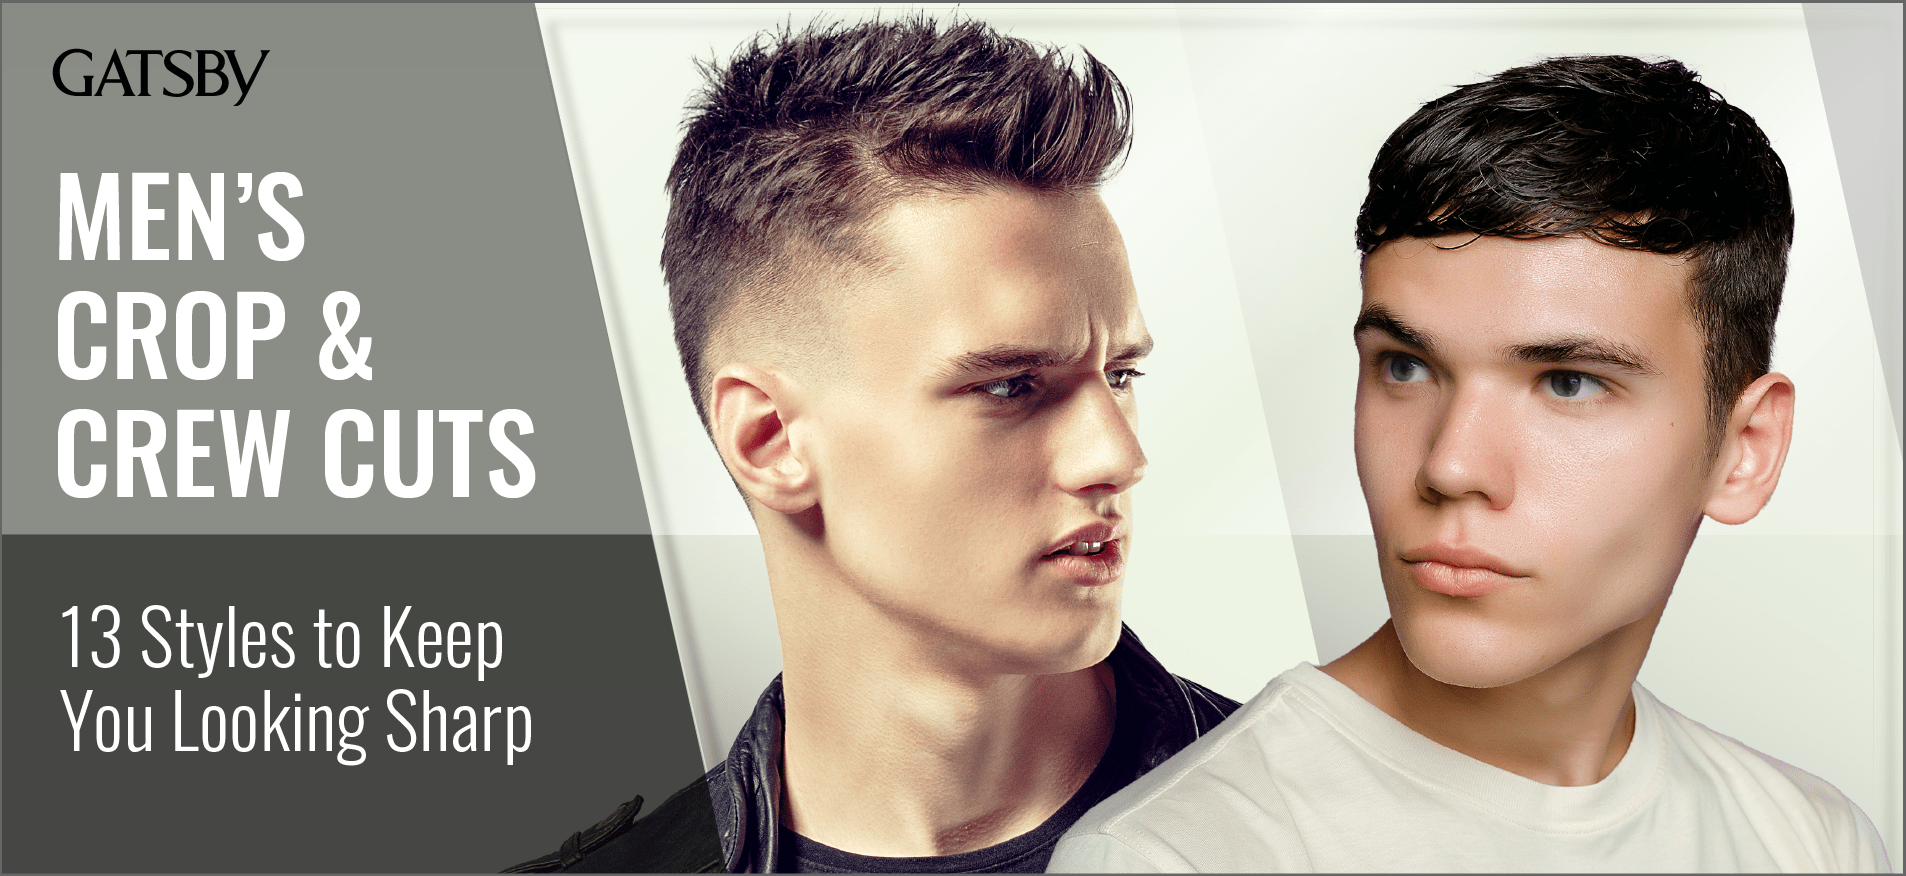 14 Best Buzz Cut Hairstyles for Men | Man of Many